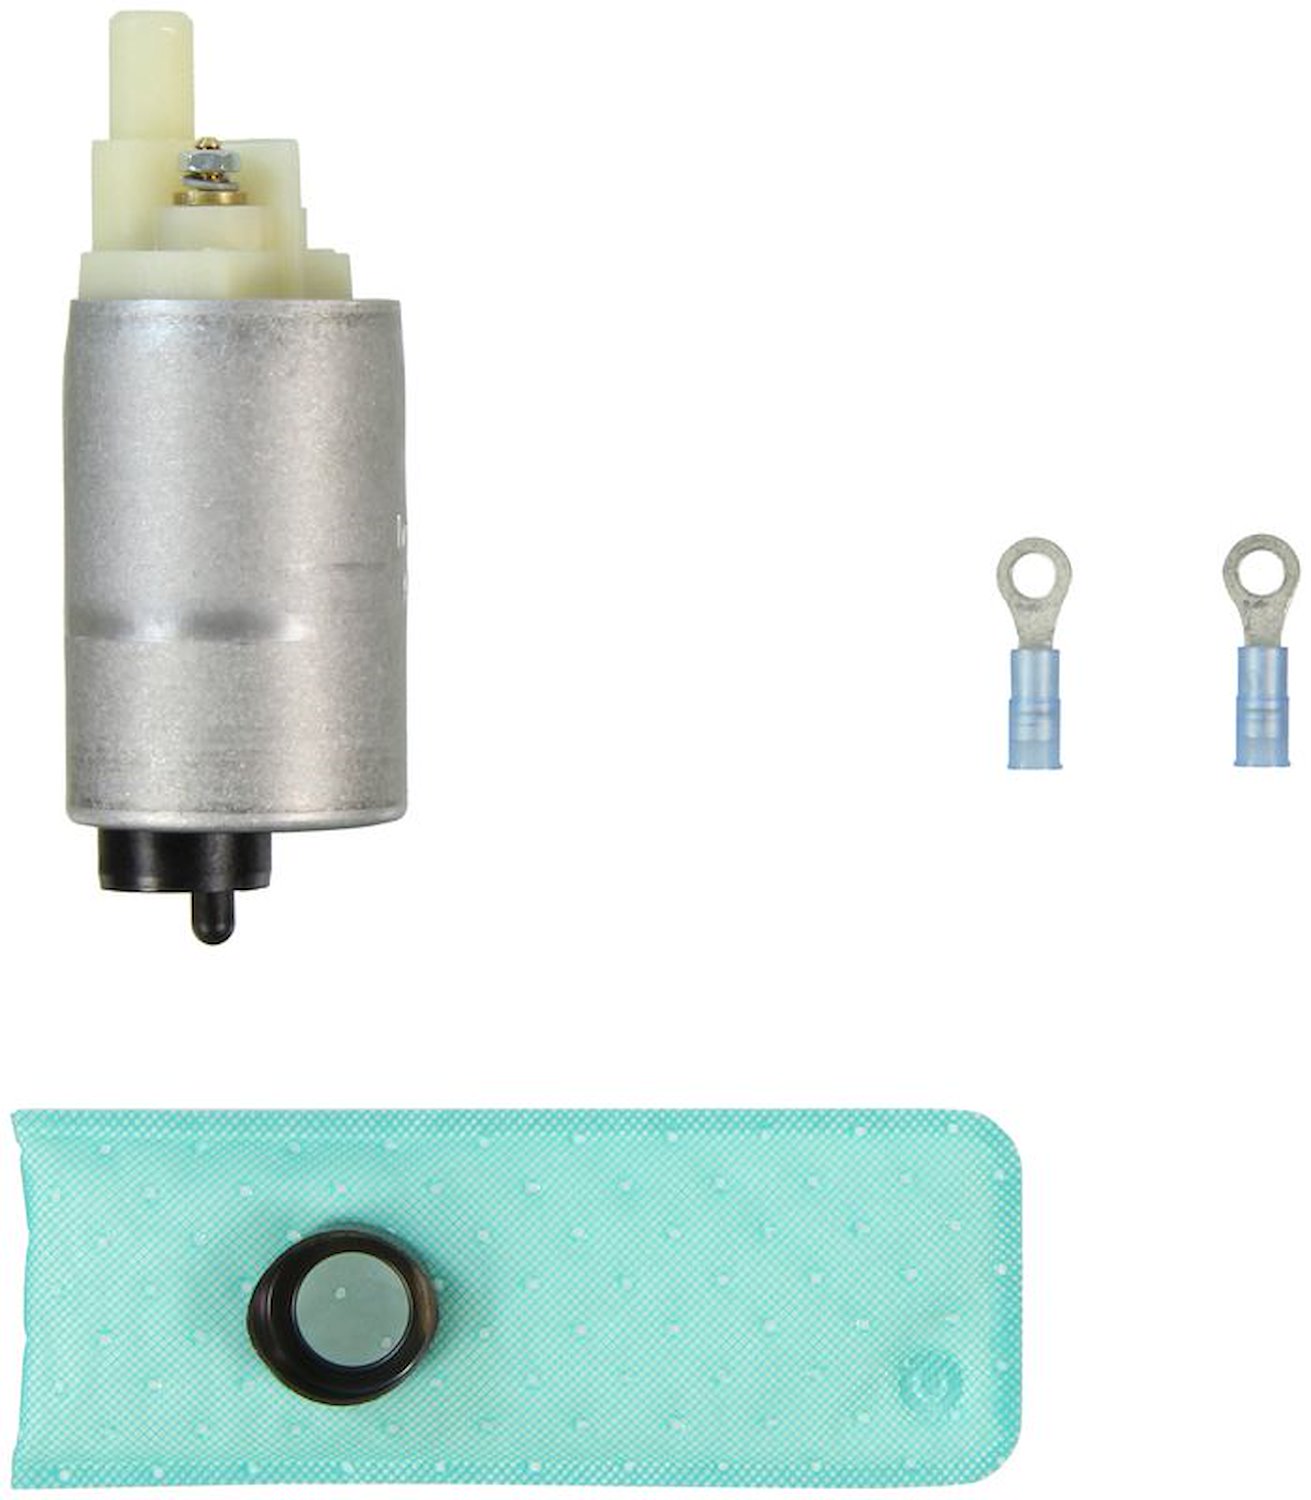 EFI In-Tank Electric Fuel Pump And Strainer Set for 1989-1994 Nissan Maxima